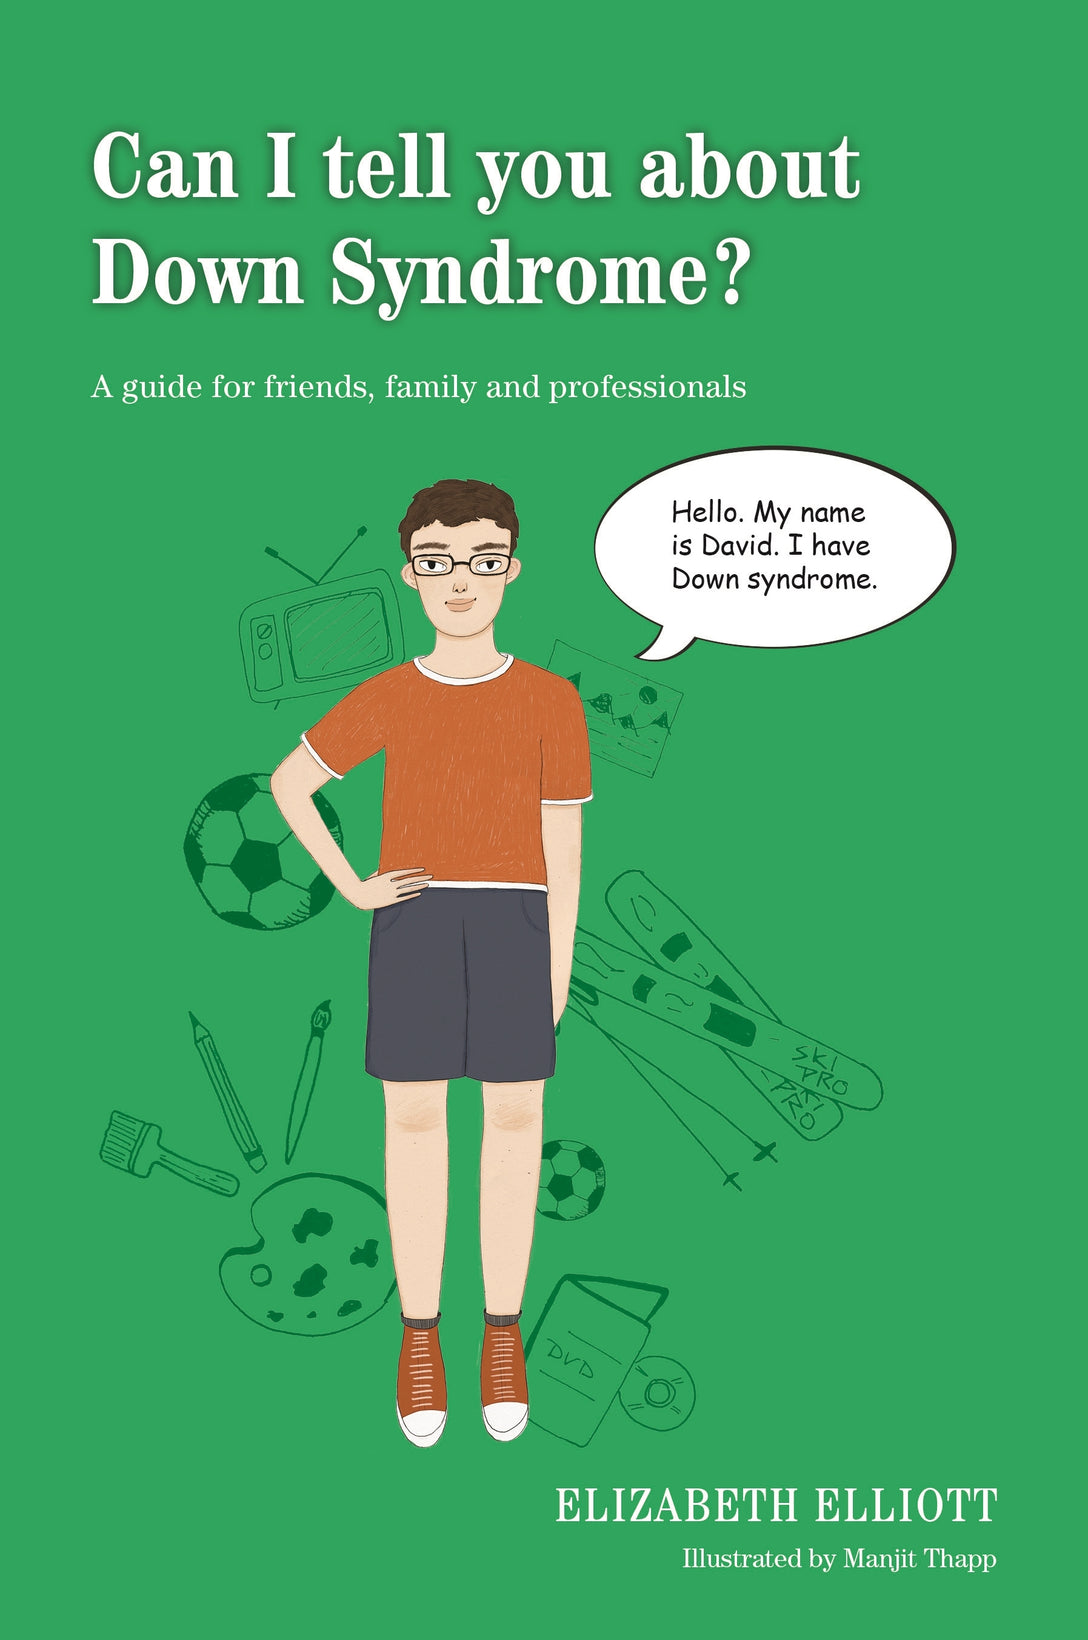 Can I tell you about Down Syndrome? by Elizabeth Elliott, Manjit Thapp